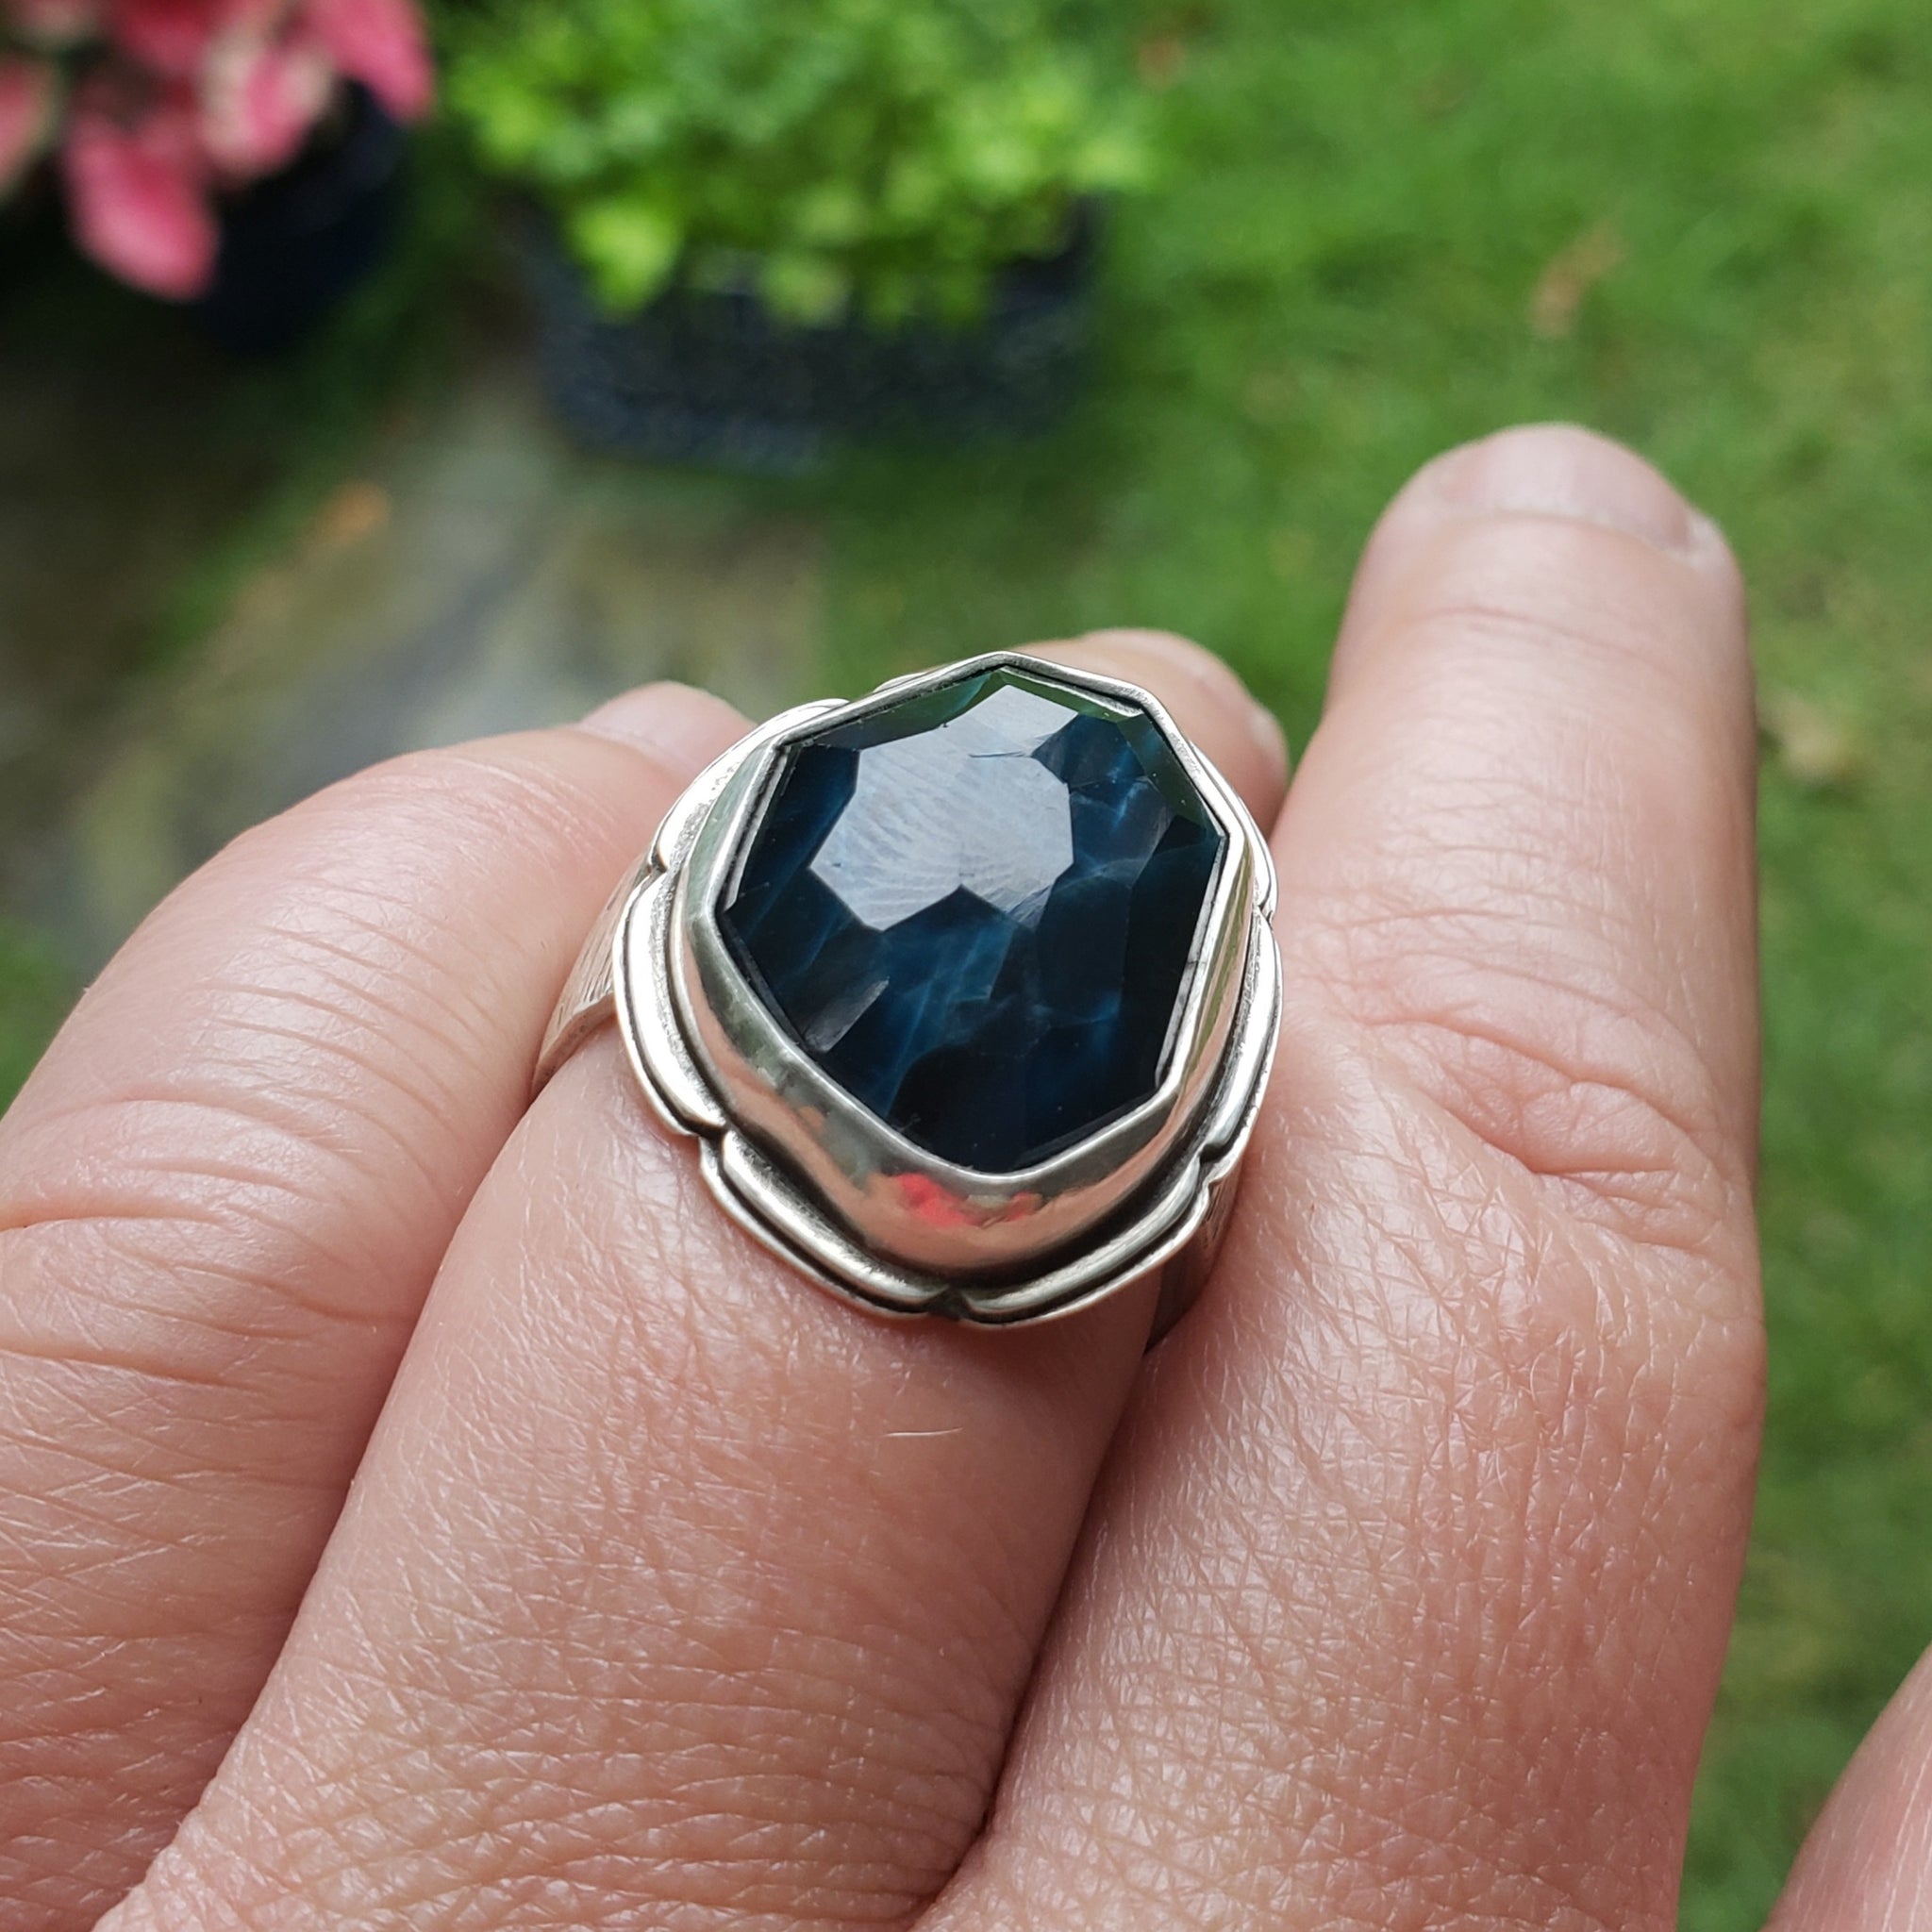 Midnight Blue Apatite Ring in Sterling Silver Size 11.75